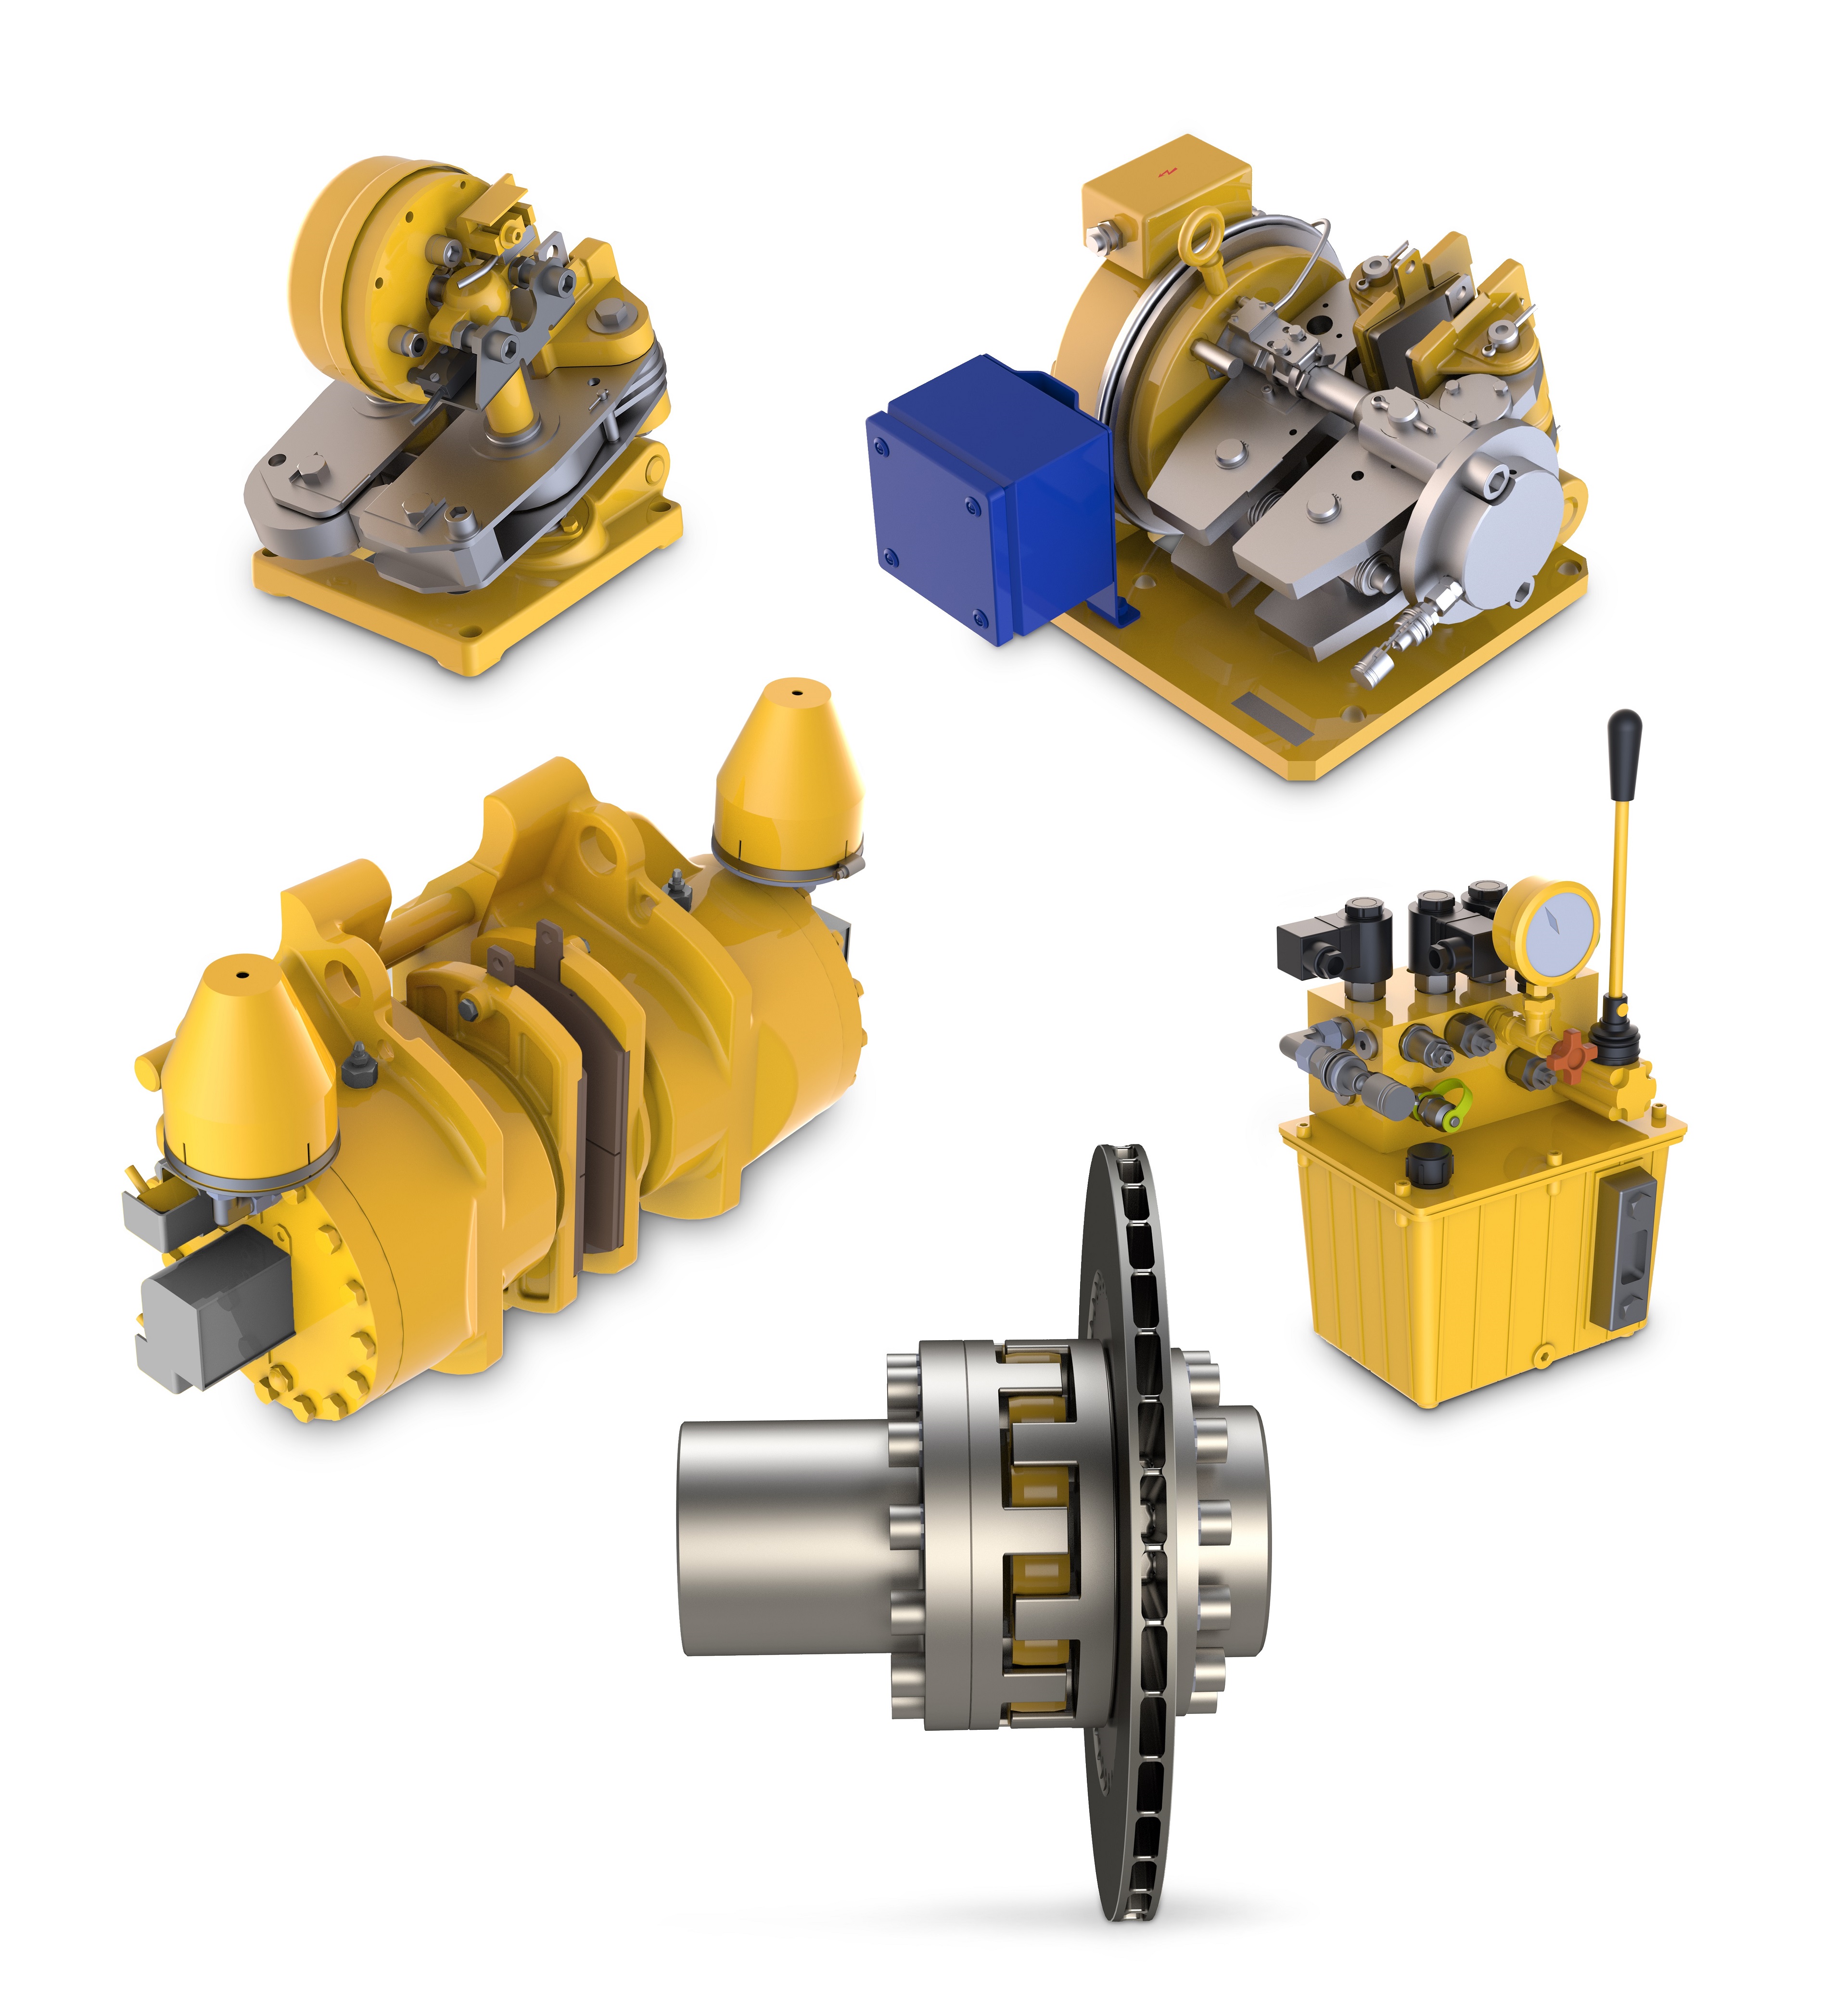 Stromag provided brakes, couplings, limit switches, hydraulic power units (HPUs) and monitoring systems.